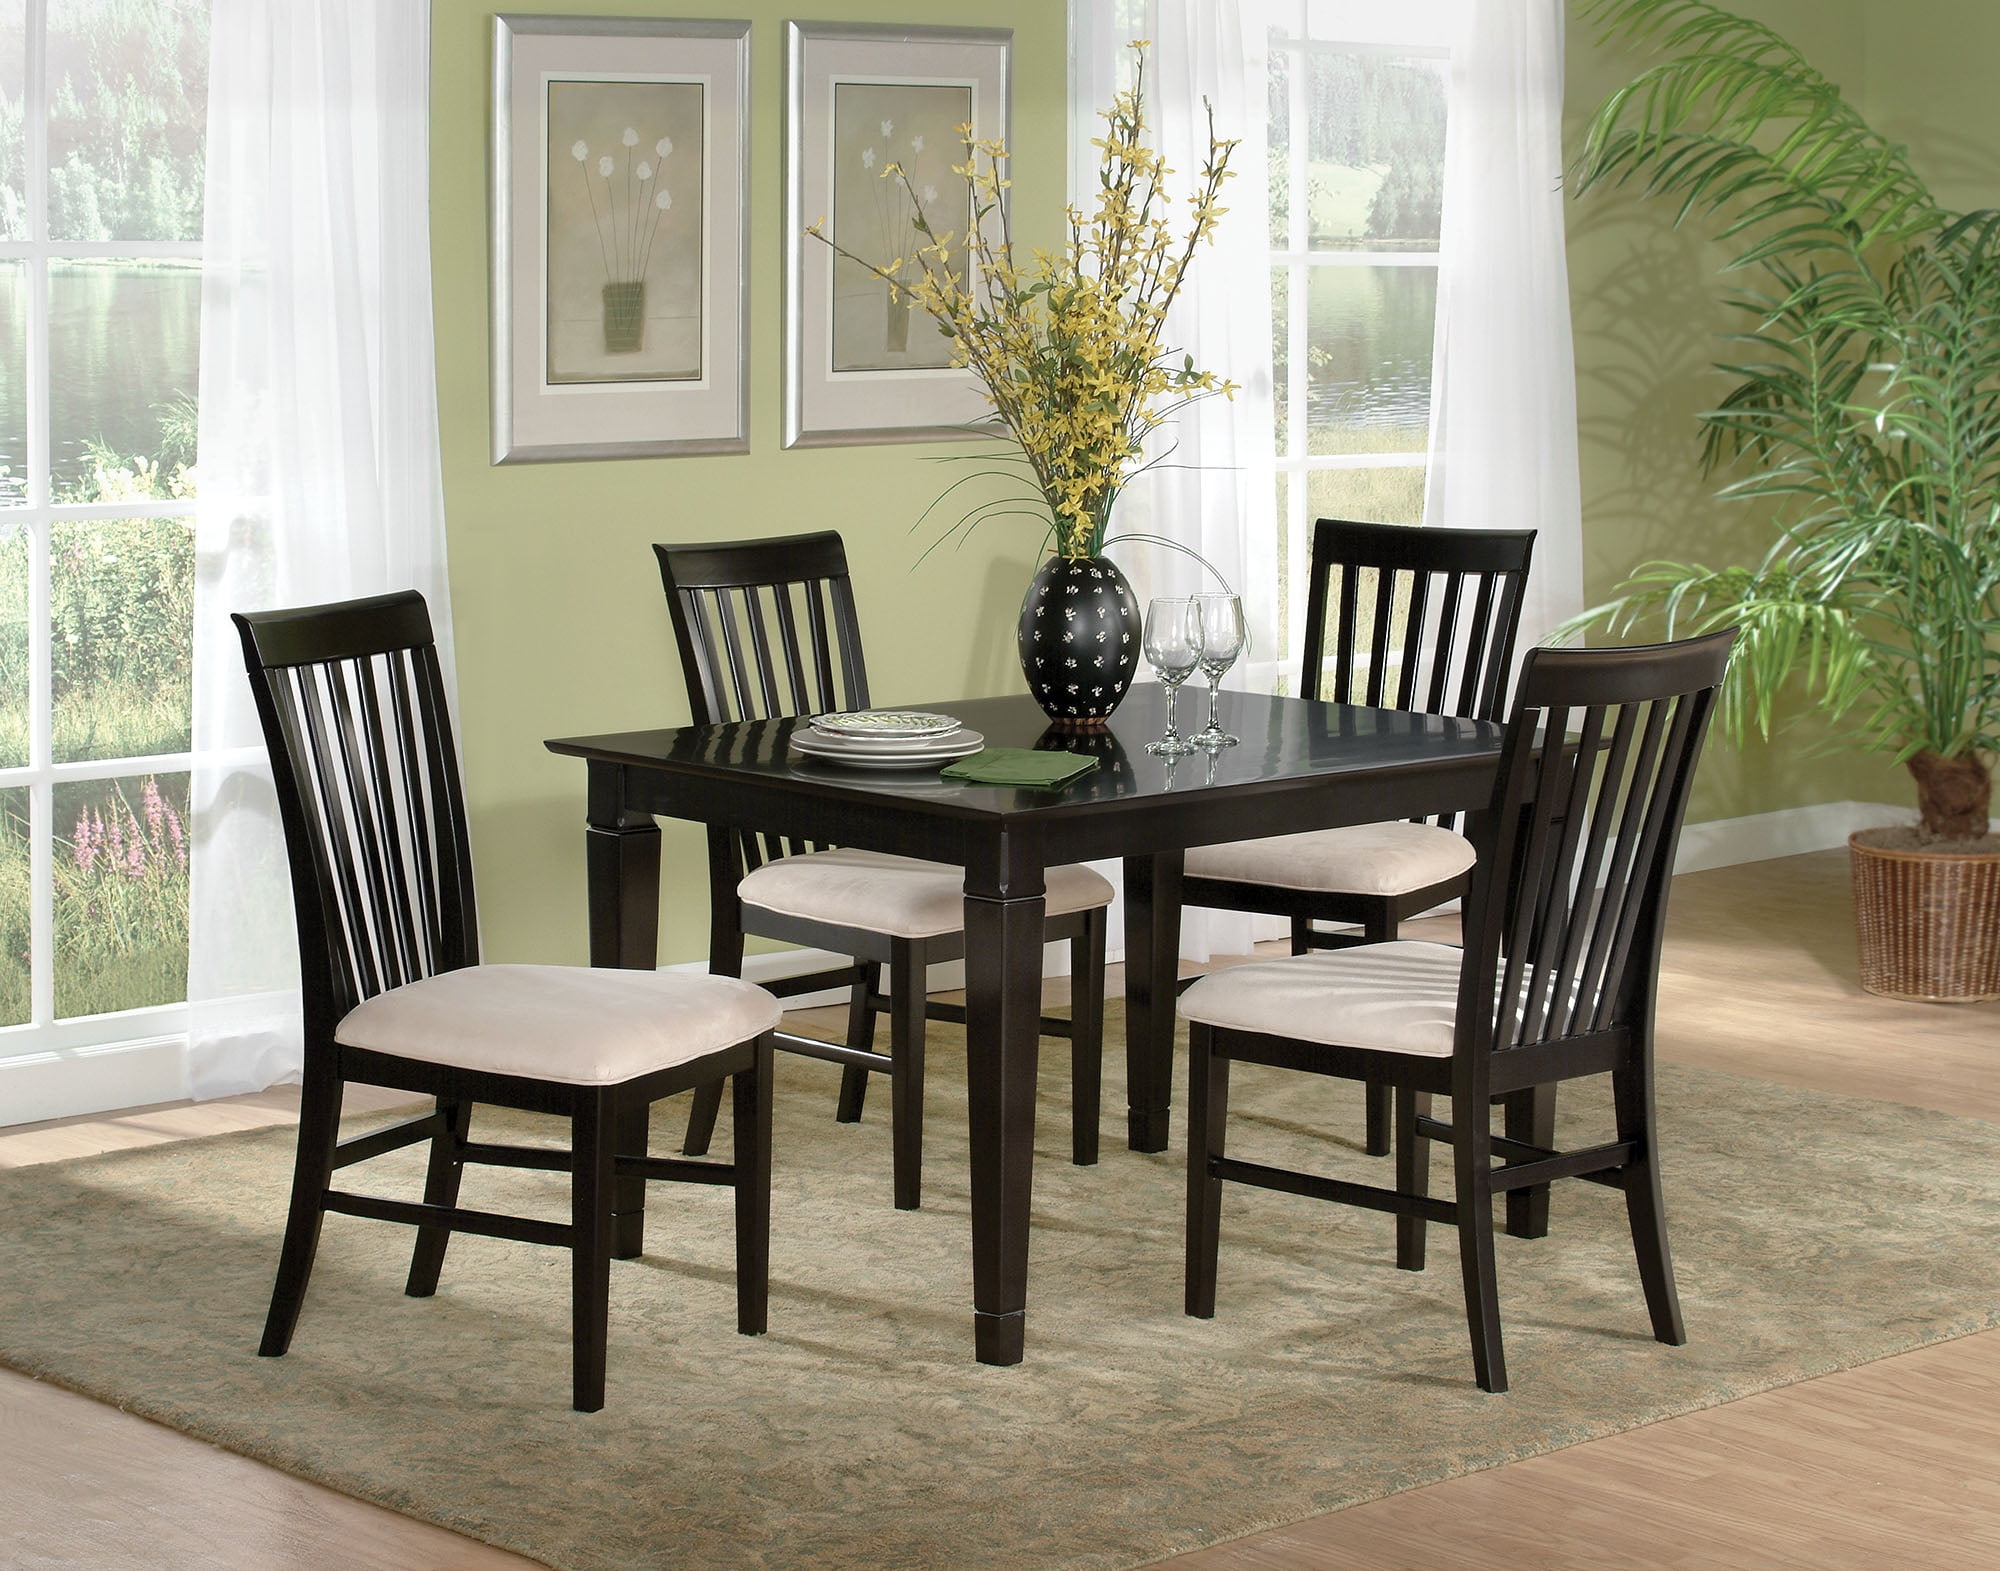 Montego Bay 36x48 Pub Set in Multiple Colors and Chair Type - Walmart.com